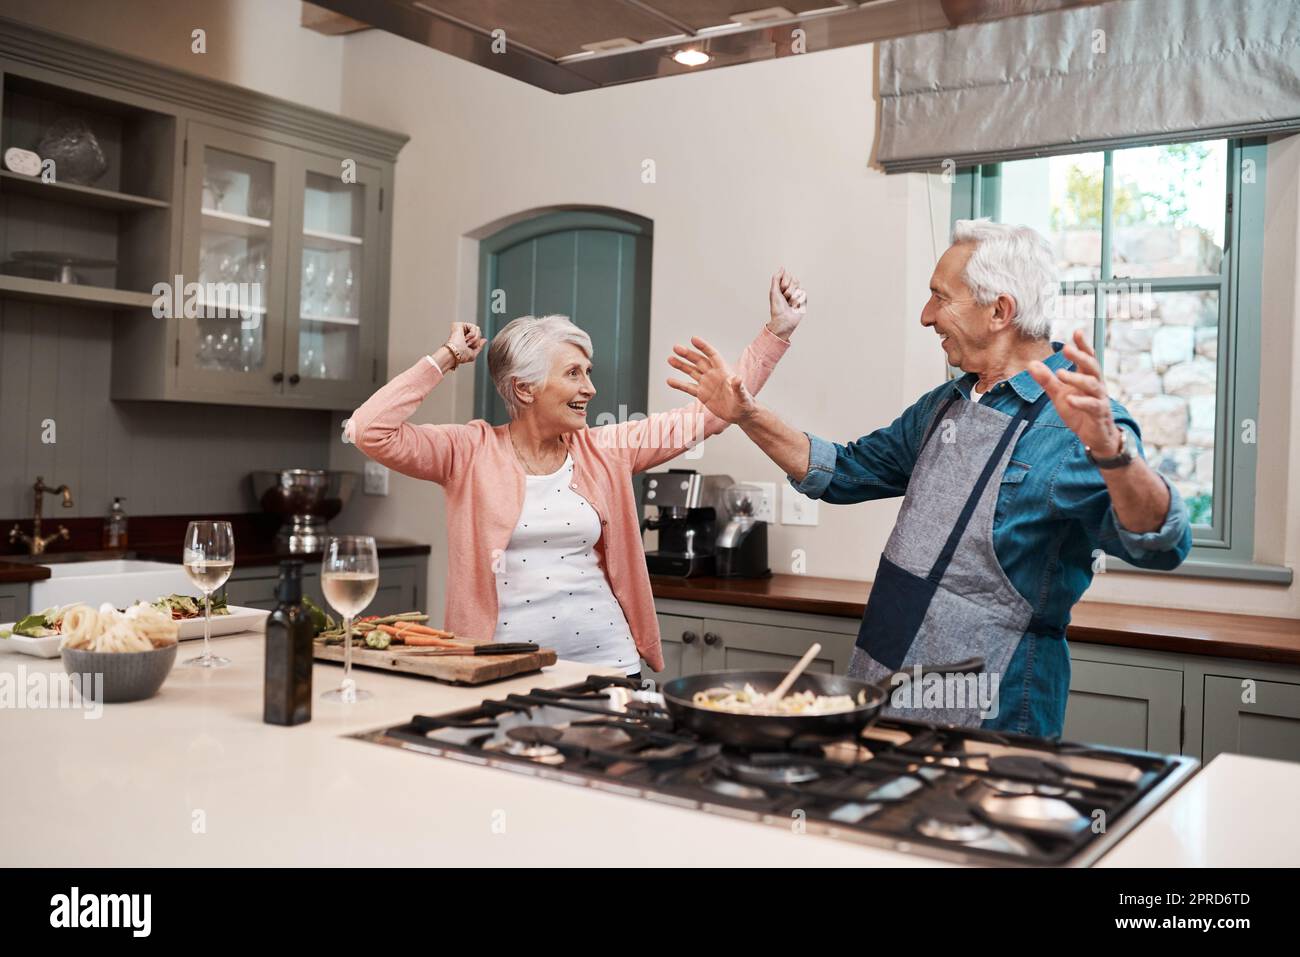 Good food puts everyone in a good mood. a senior couple dancing while cooking in the kitchen at home. Stock Photo